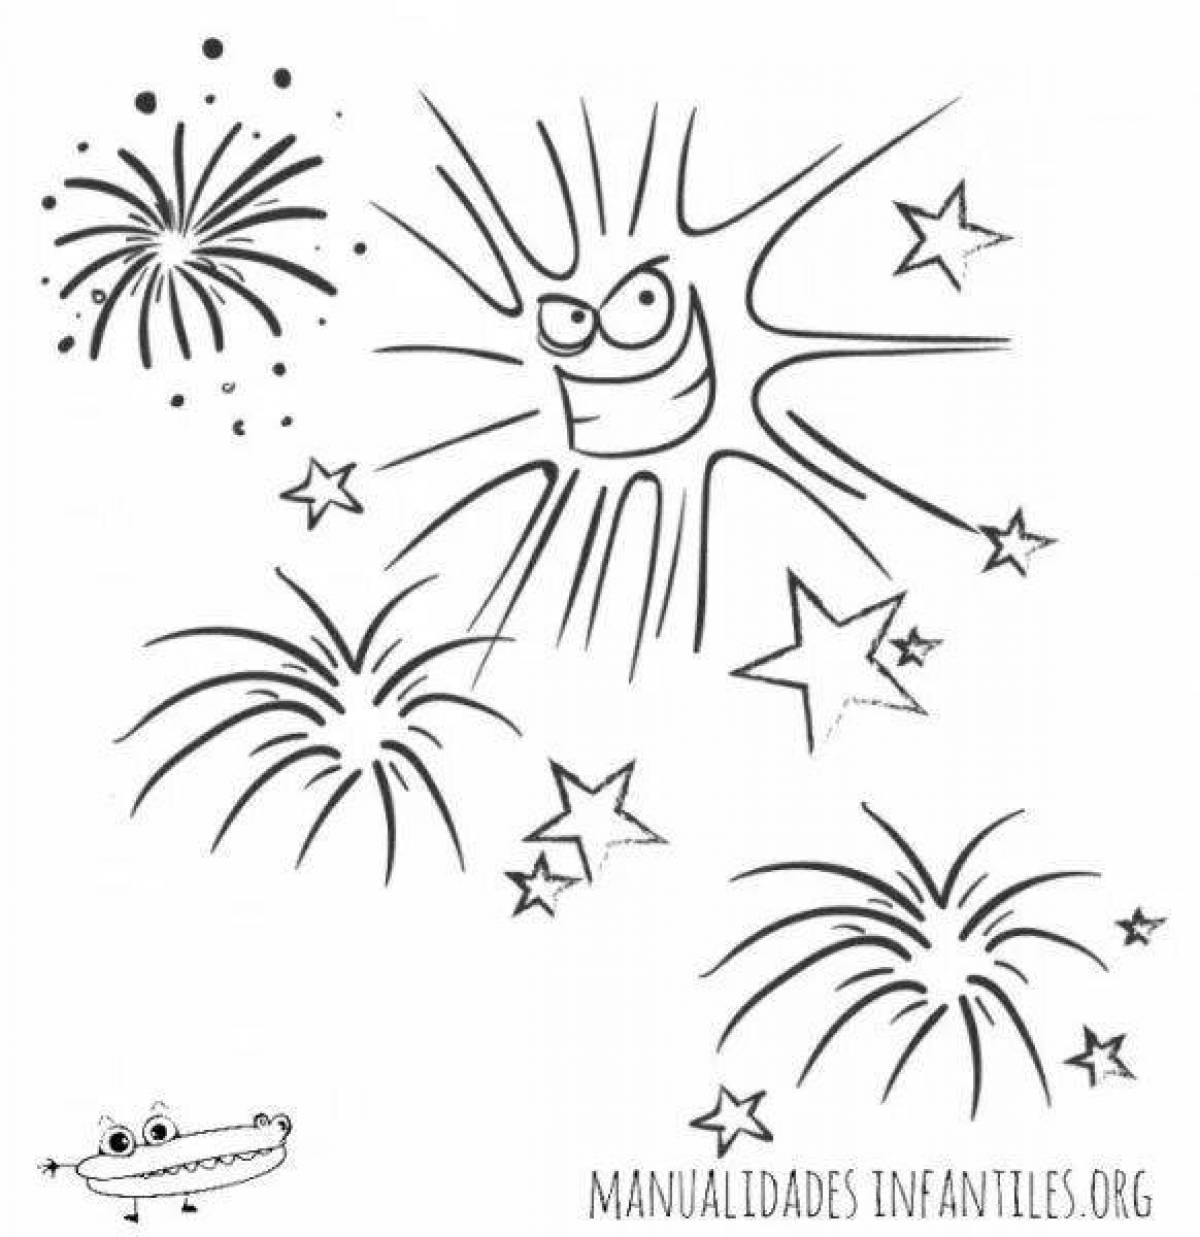 Coloring bright fireworks for children